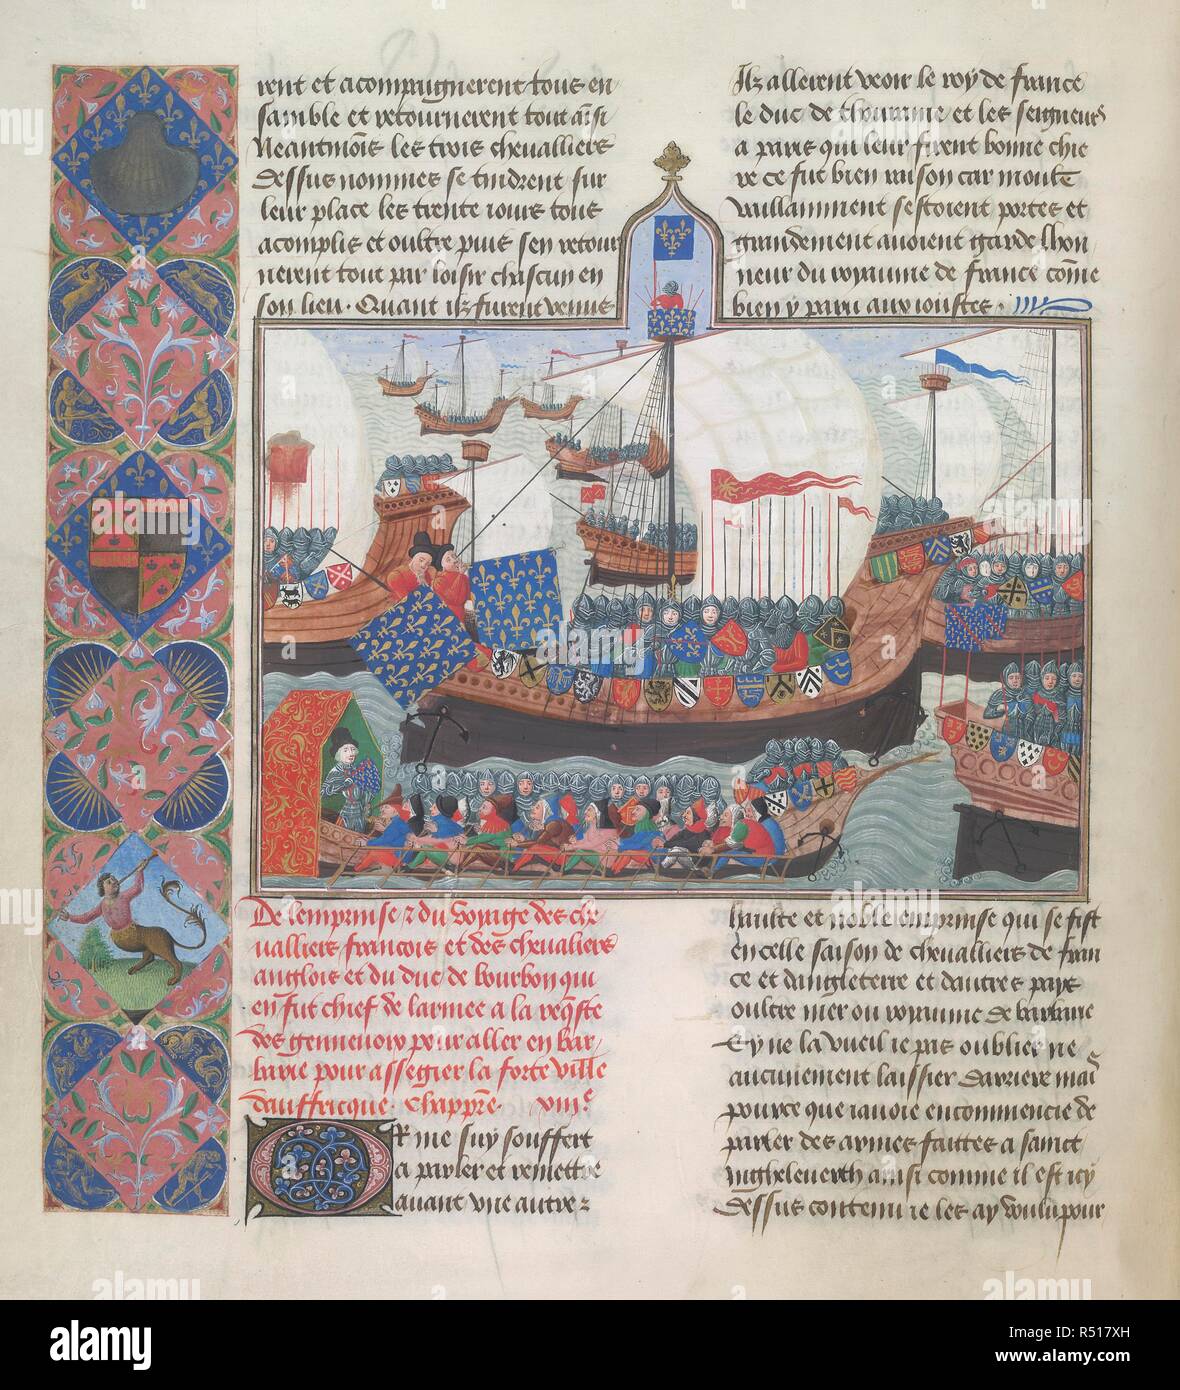 Expedition to Barbary. Chroniques, Vol. IV, part 1 (the 'Harley Froissart'). (Froissart's Chronicles). S. Netherlands [Bruges]; 1470-1475. [Whole folio] Expedition of the French and Genoese to Barbary. The soldiers in the ships with the heraldic shields. Text with decorated initial 'O'. Border decoration, including a centaur and heraldic shield  Image taken from Froissart's Chronicles (Volume IV, part 1).  Originally published/produced in S. Netherlands [Bruges]; 1470-1475. . Source: Harley 4379, f.60v. Language: French. Author: FROISSART, JEAN. Stock Photo